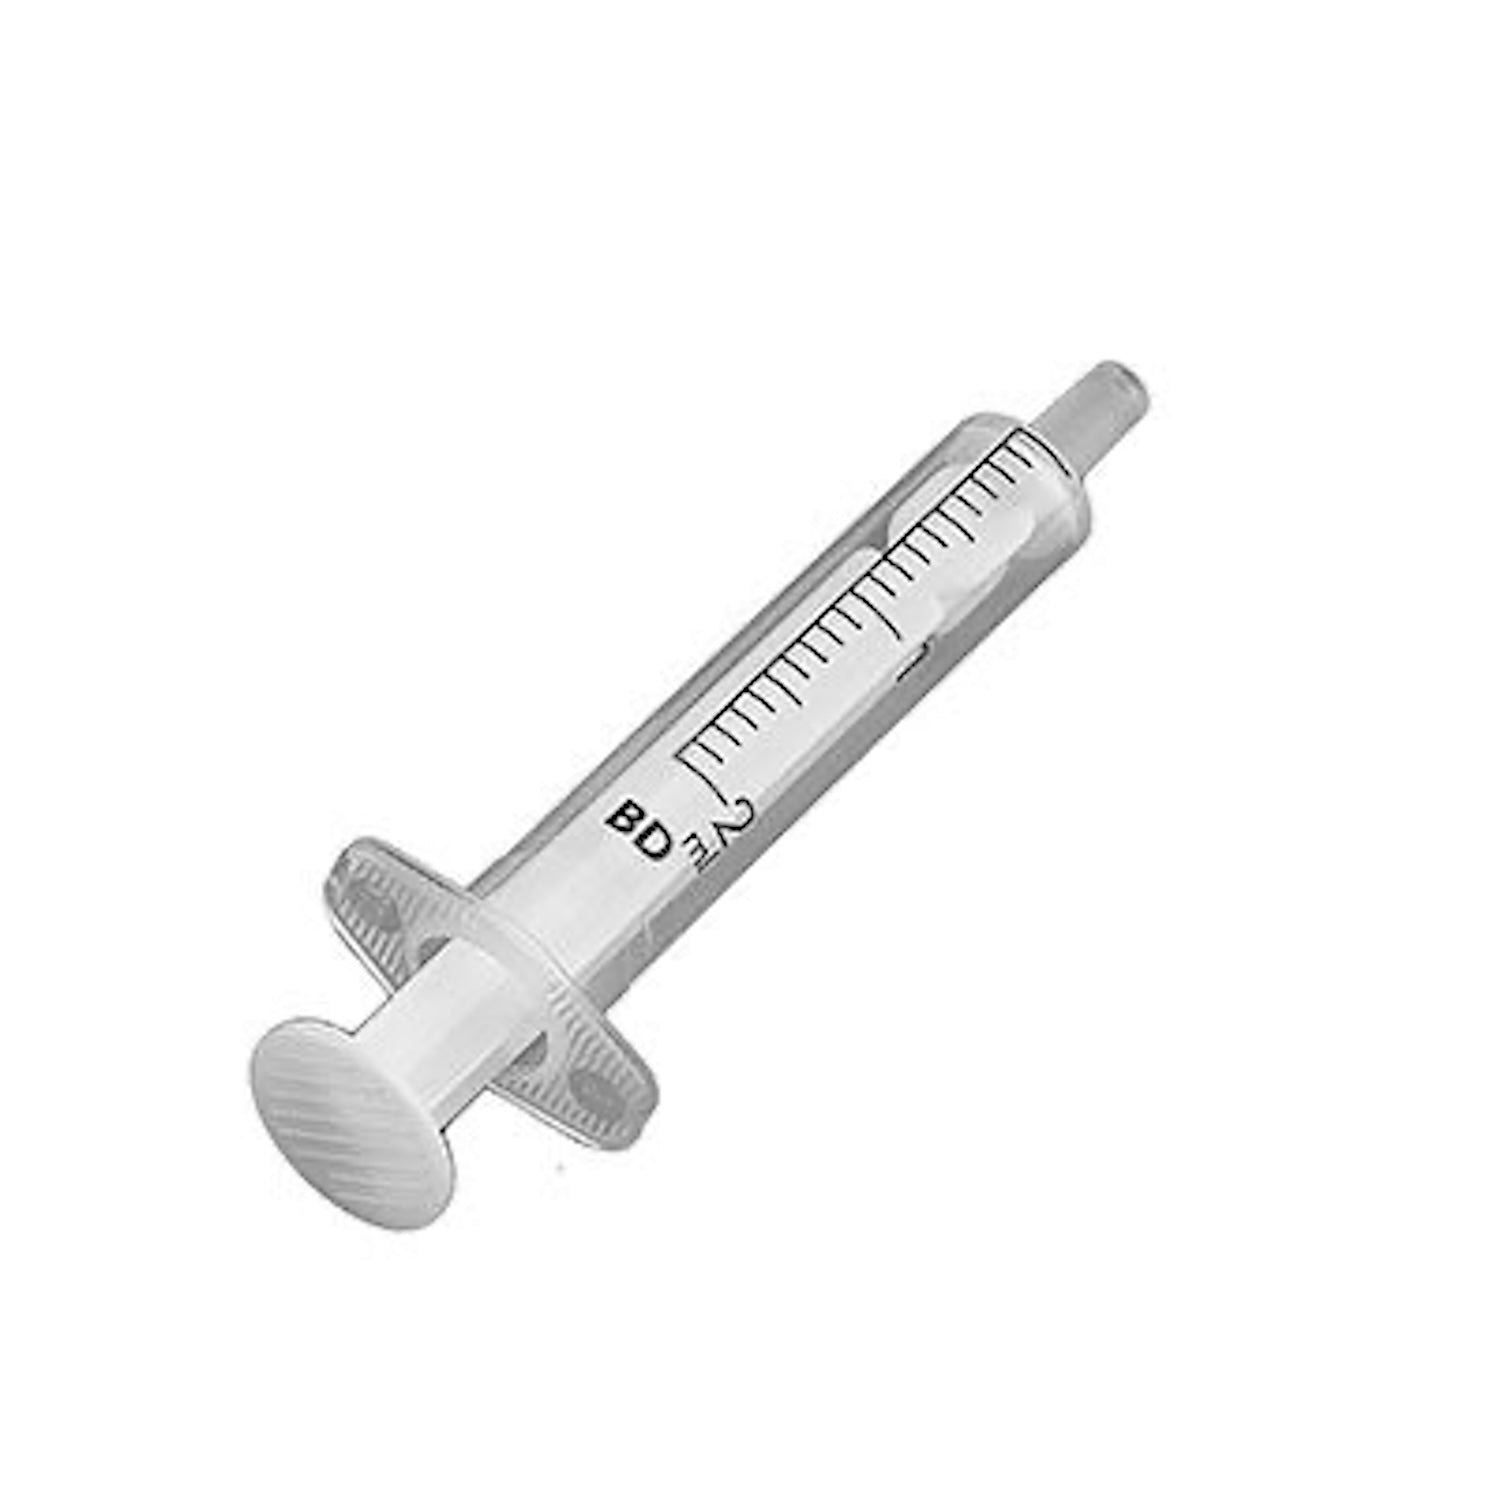 BD Discardit 2 Piece Syringe | 2ml Luer Slip | Concentric Tip | Scale 0.1ml | Pack of 100